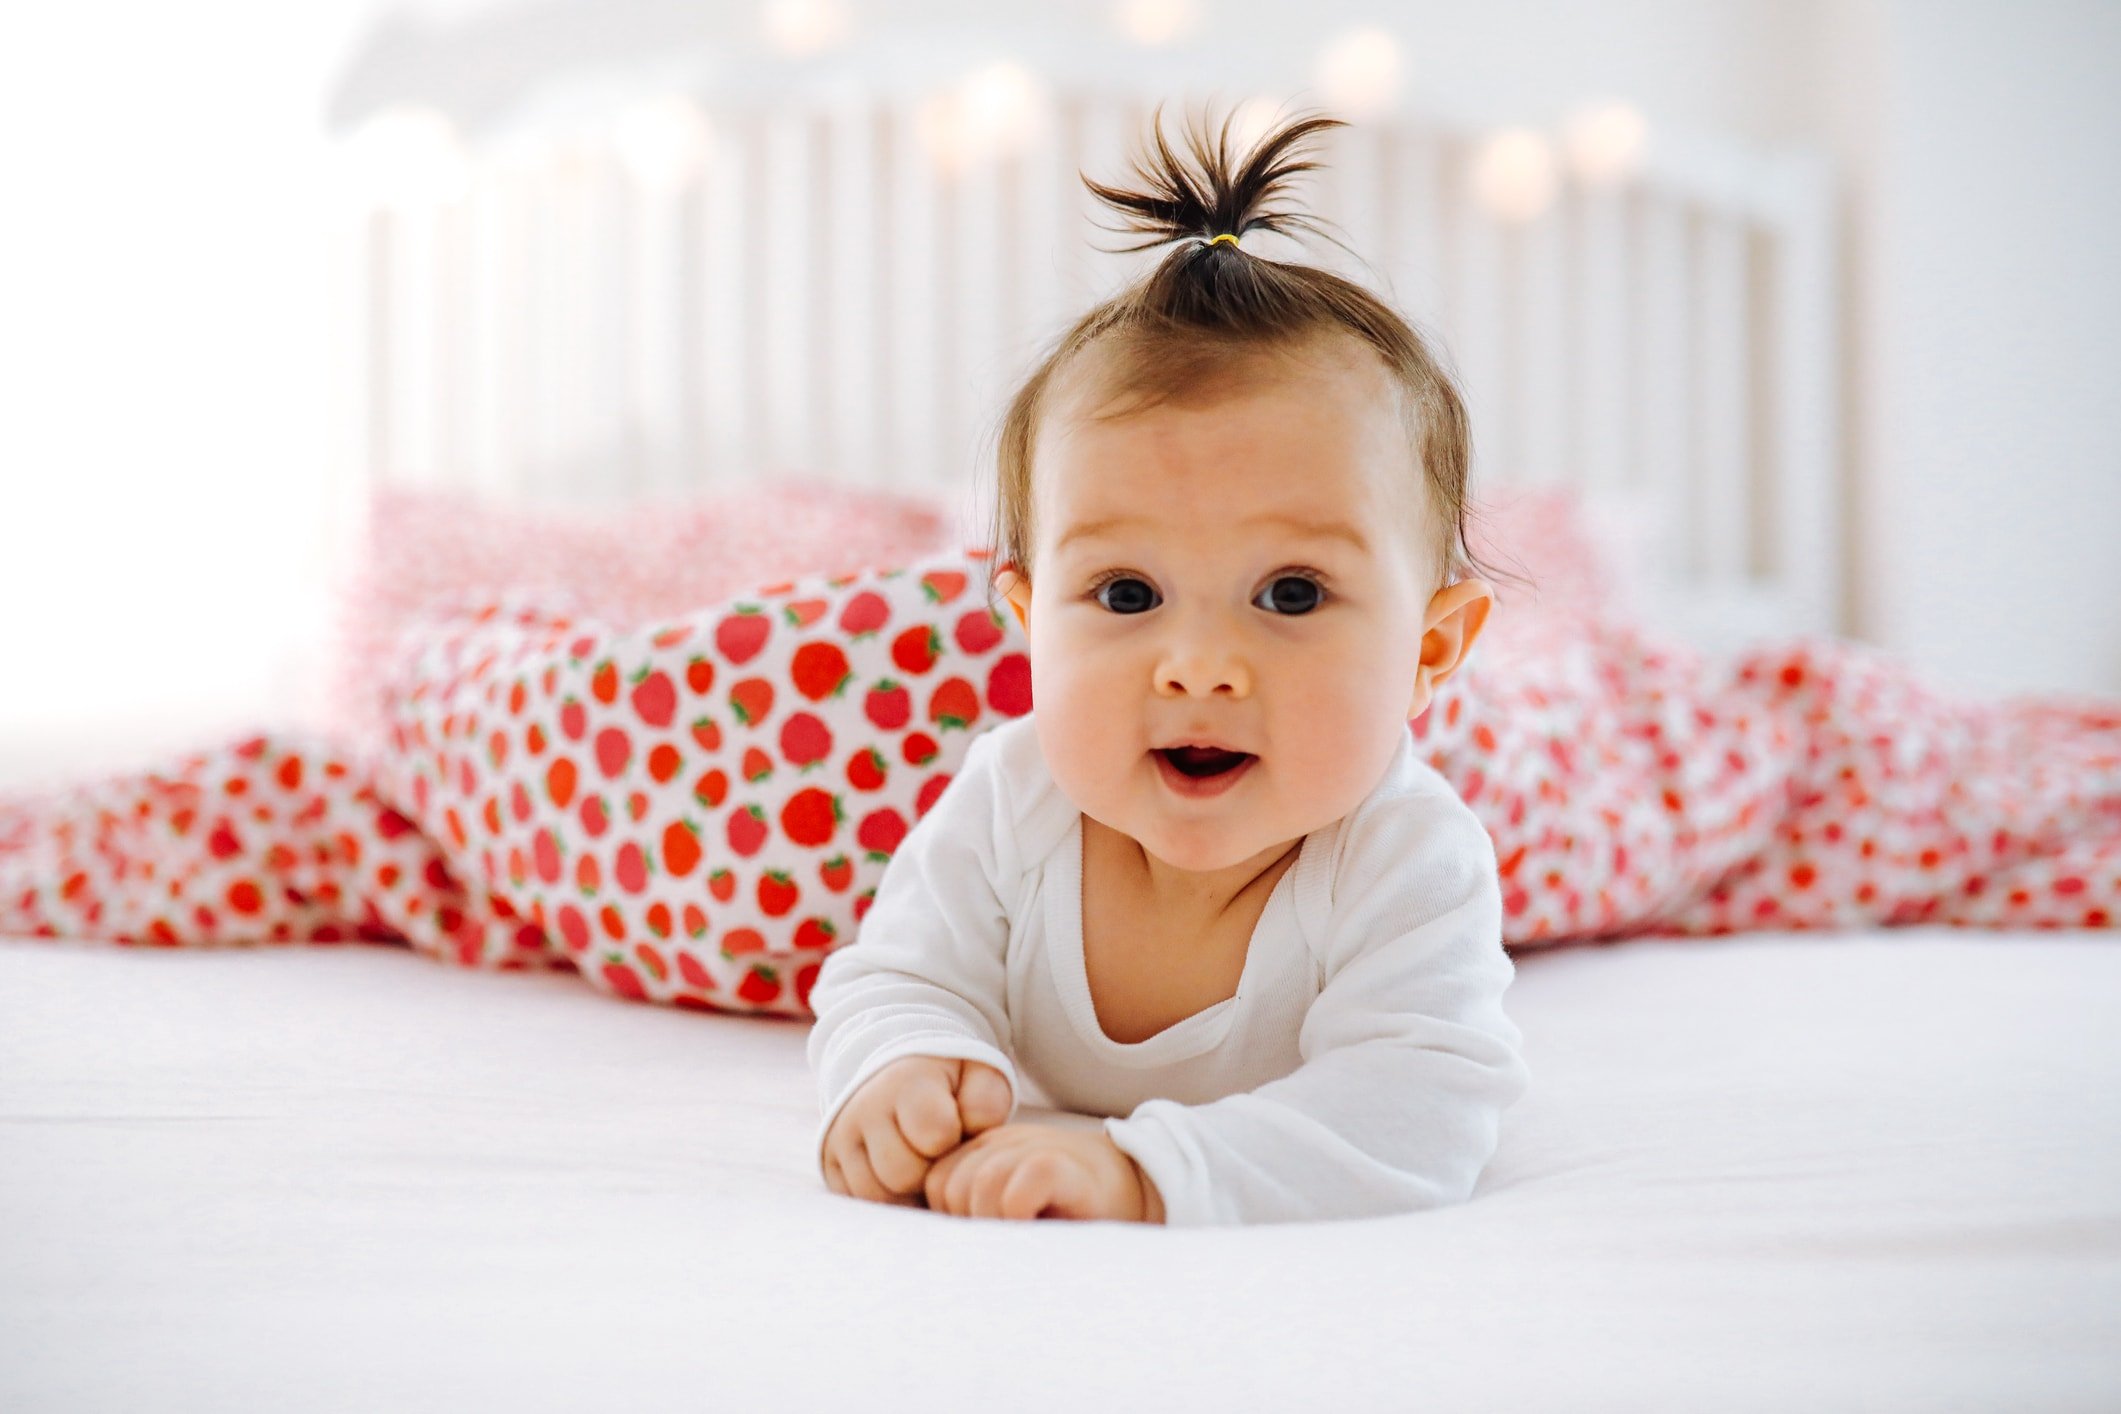 100 Baby Girl Names That Start With D - Baby Chick